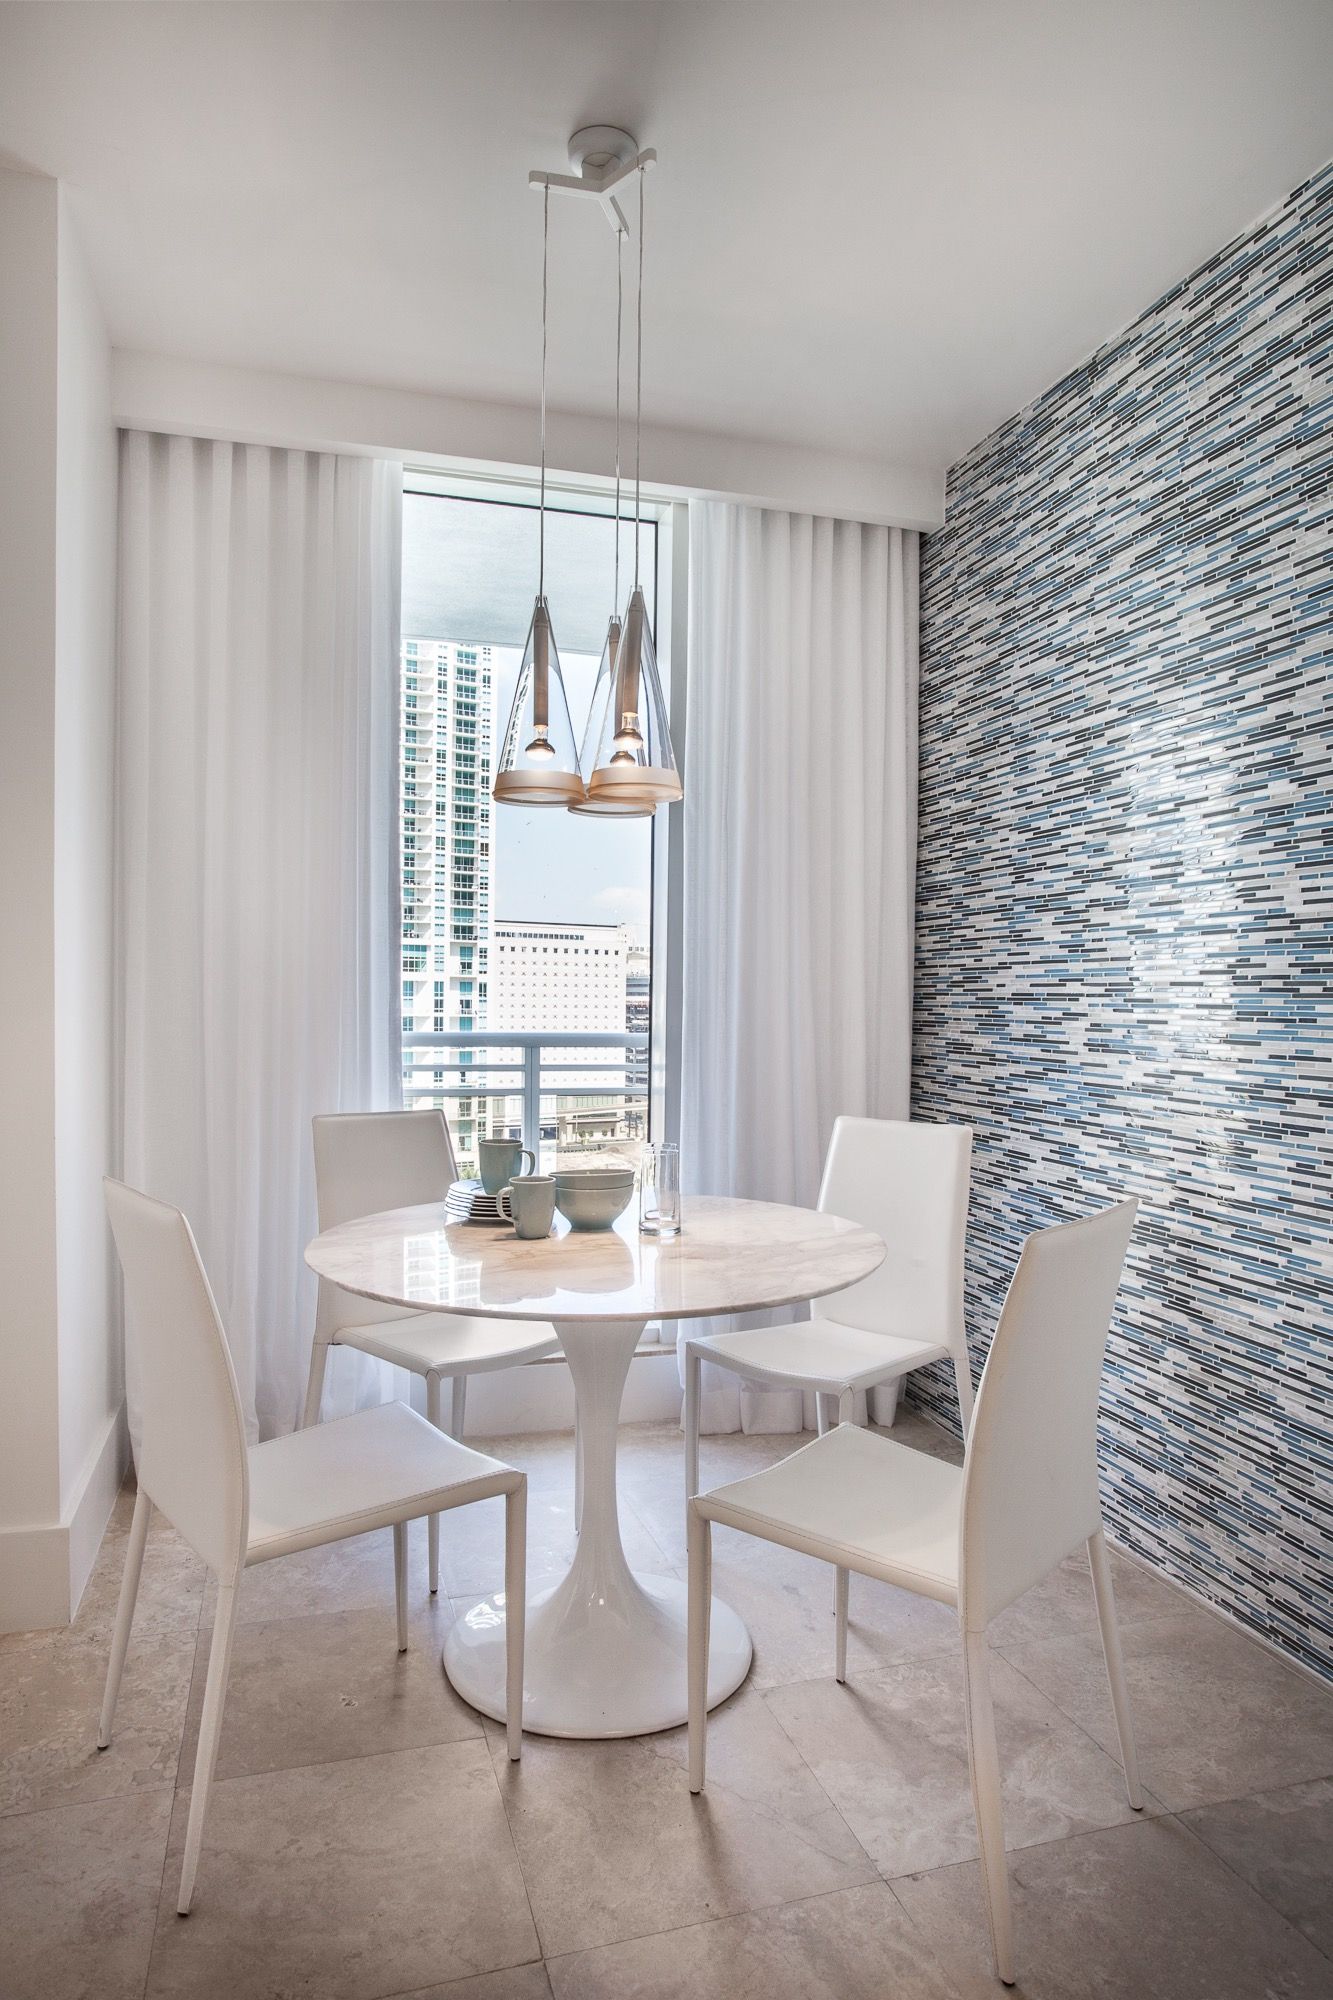 Small White Apartment Dining Room With Tile Wall (View 18 of 18)